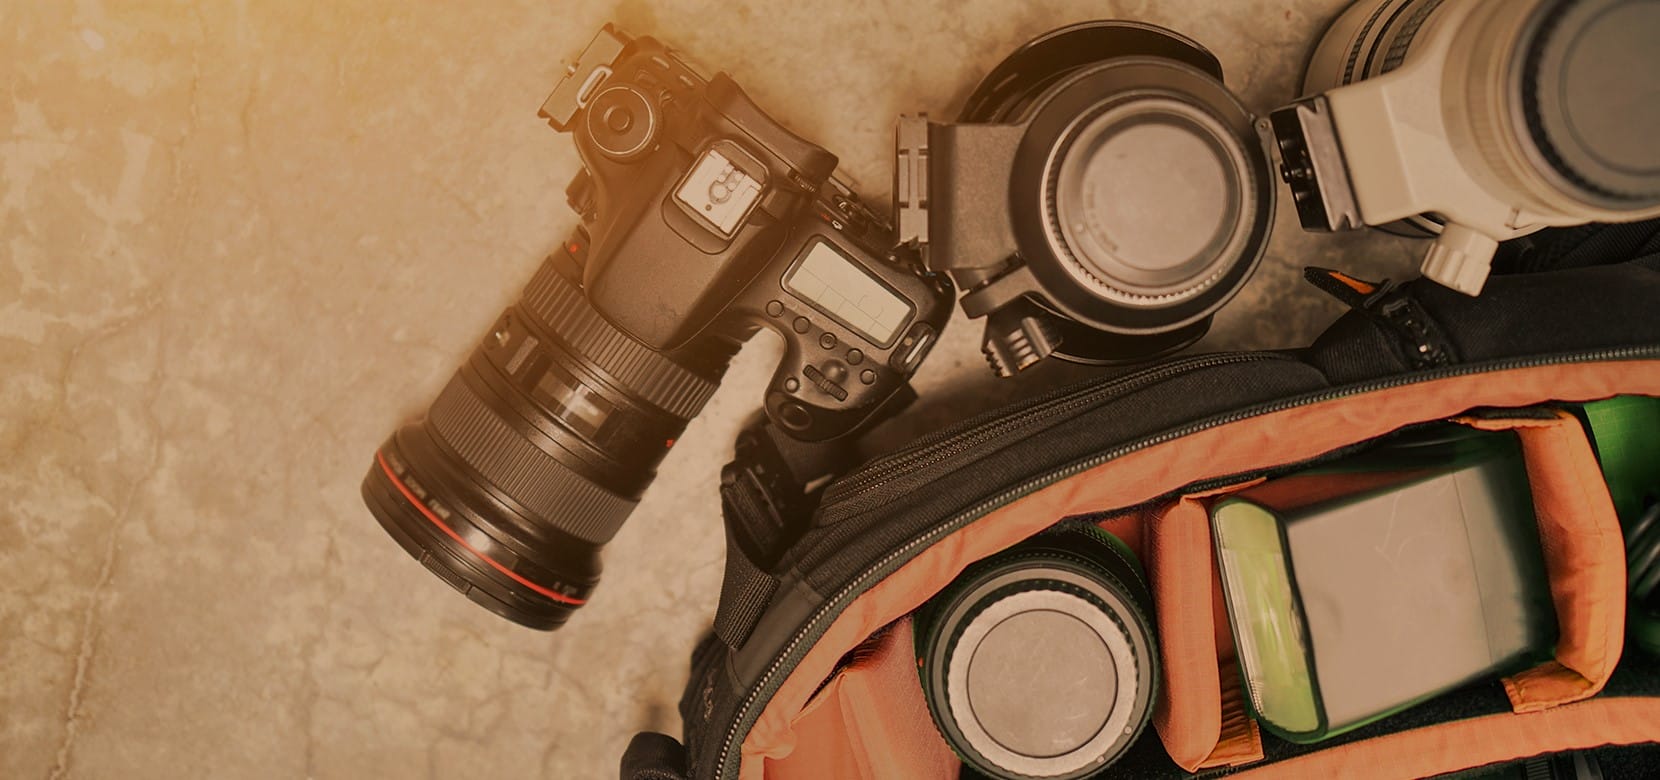 an overhead view of a digital camera and lenses next to camera bag